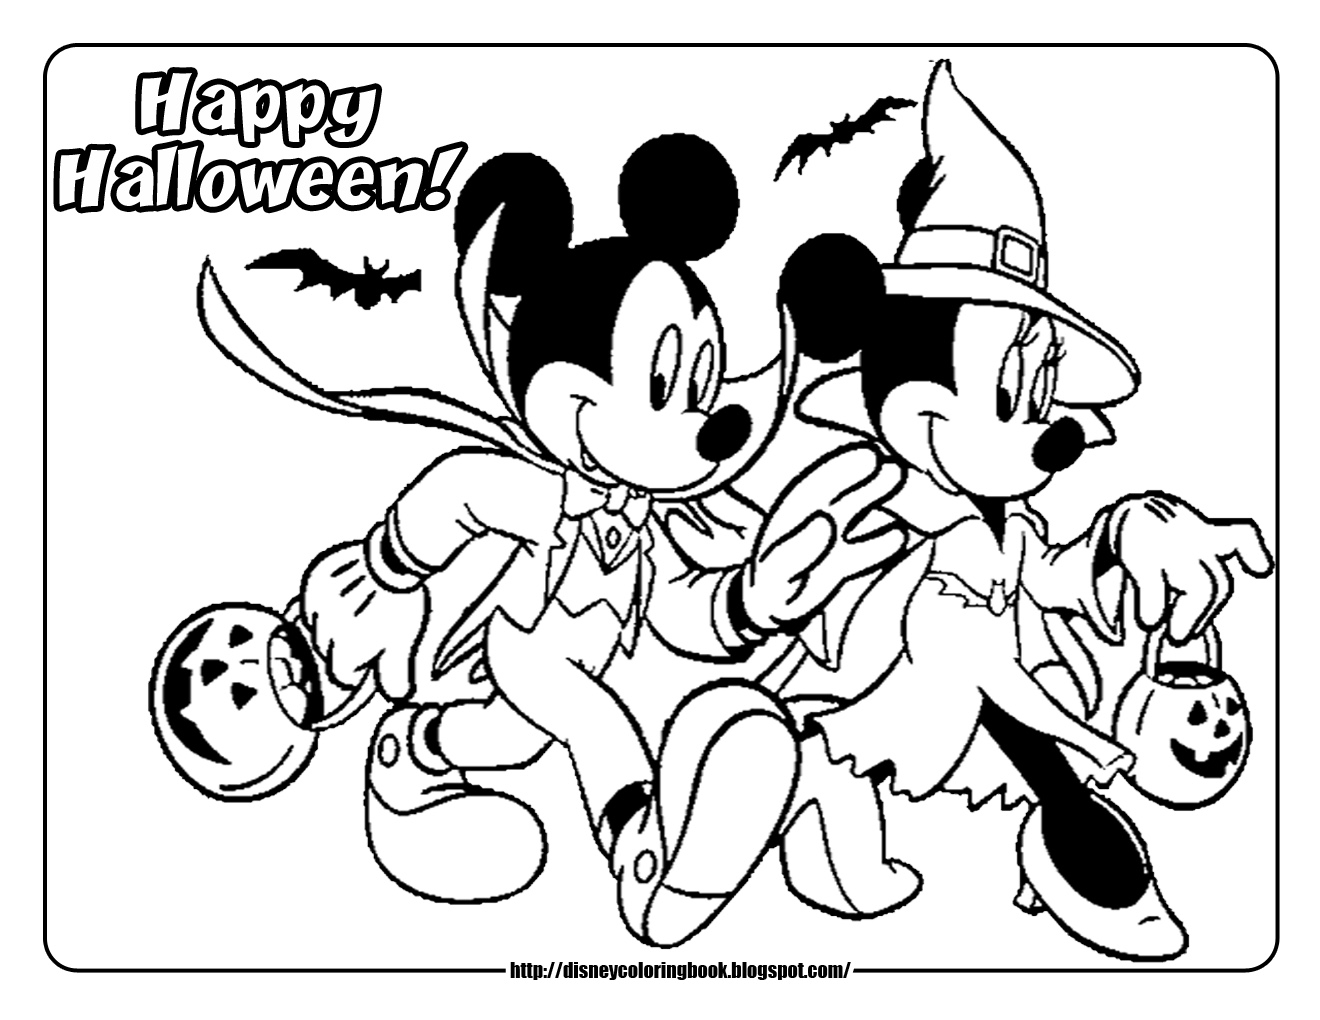 Disney Coloring Pages and Sheets for Kids Mickey and Friends Halloween